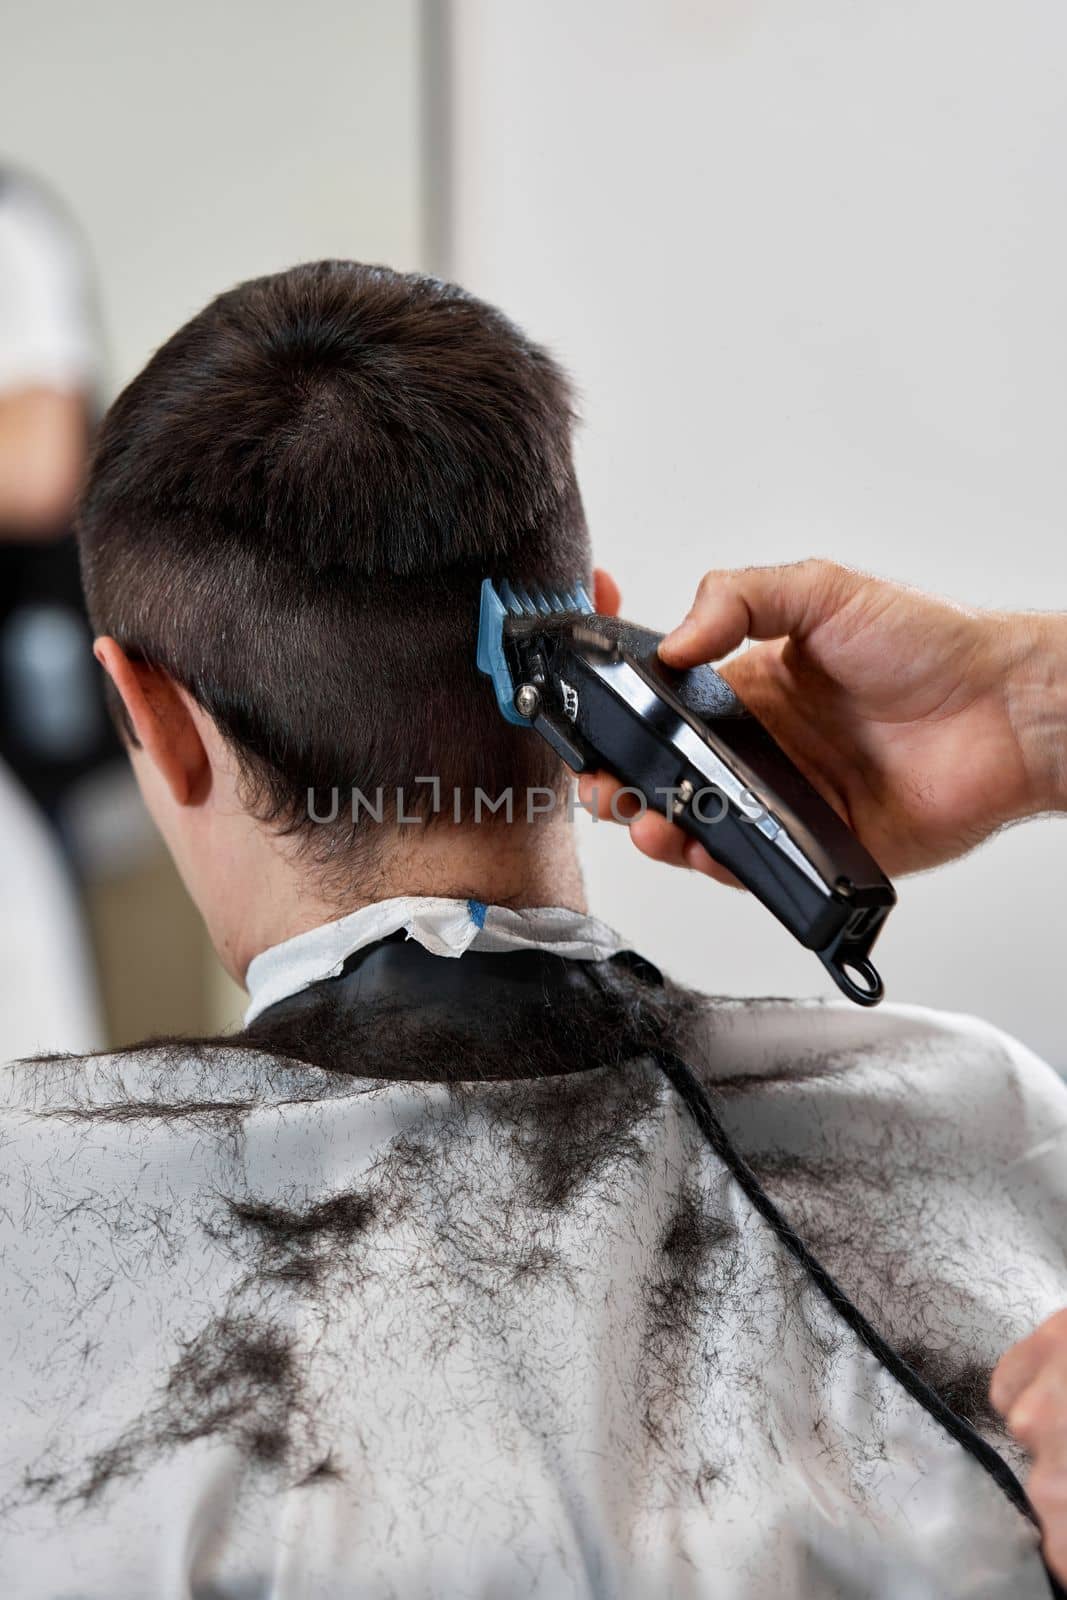 Barber cut hair with electric shearer machine on man in barber shop.